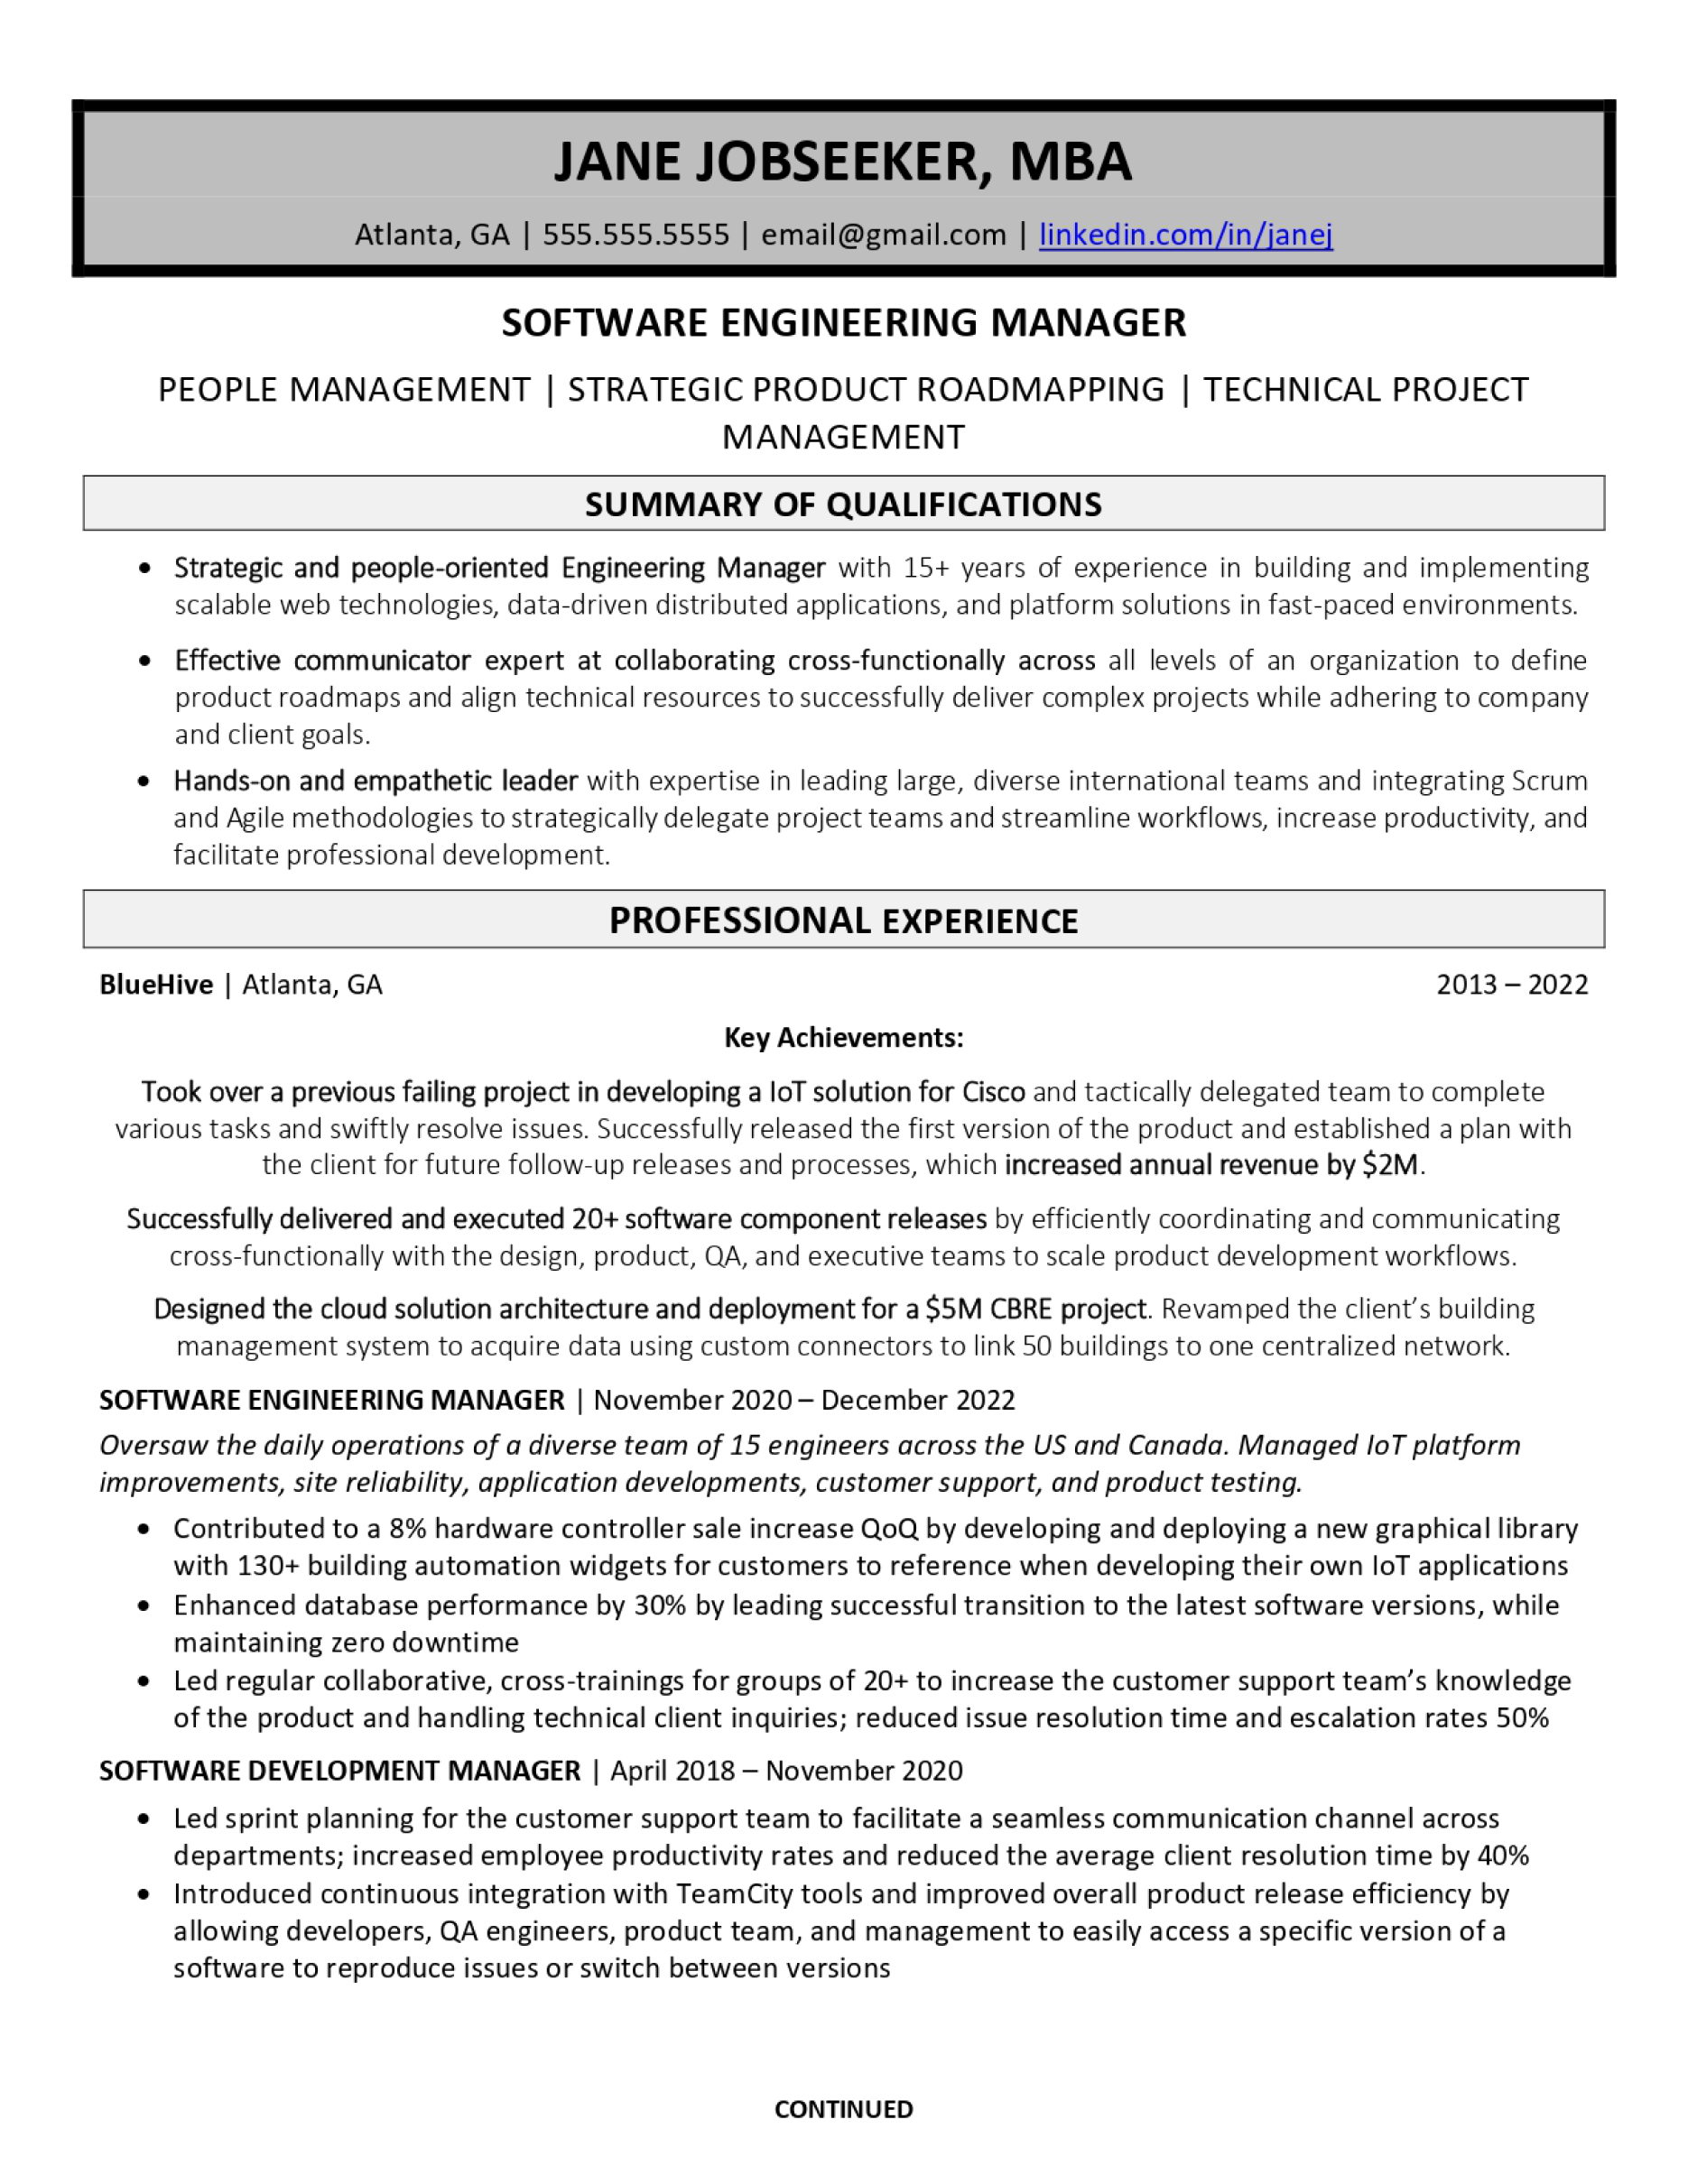 Page 1 of a sample Customer Service resume from Let's Eat, Grandma, the Best Resume Writing Service of 2022